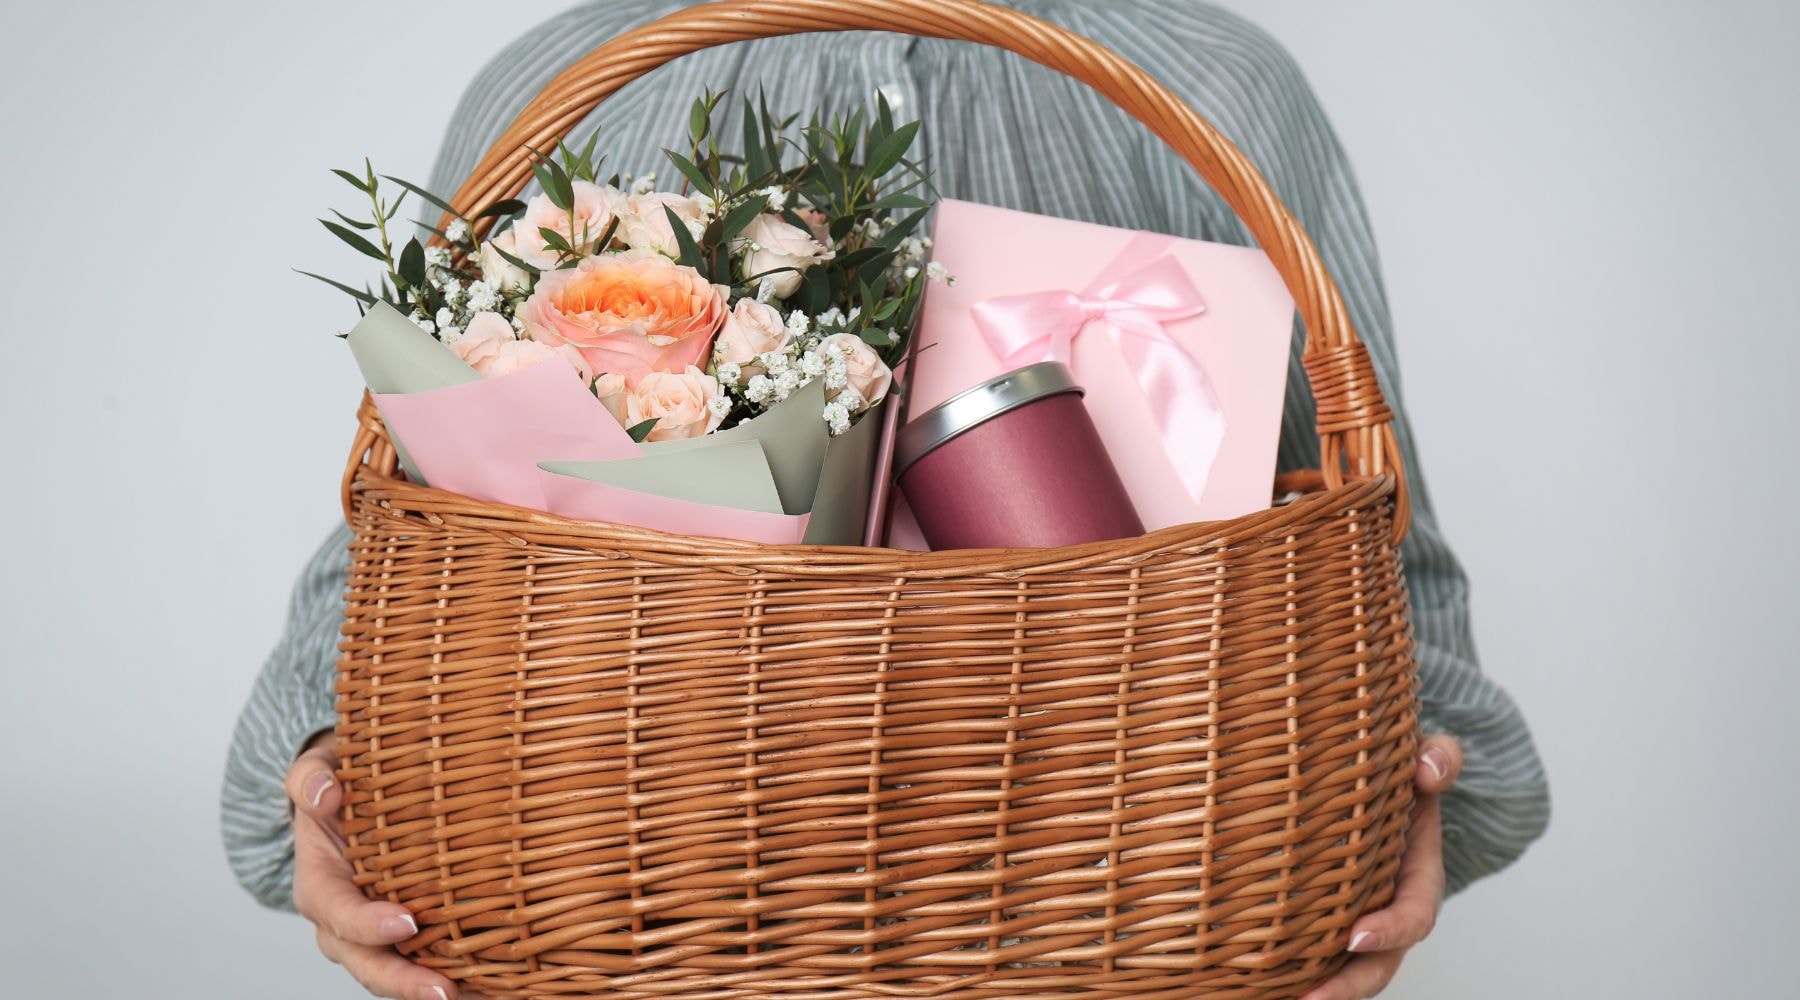 Wicker basket held by person, containing flowers, cards, and colored tins.